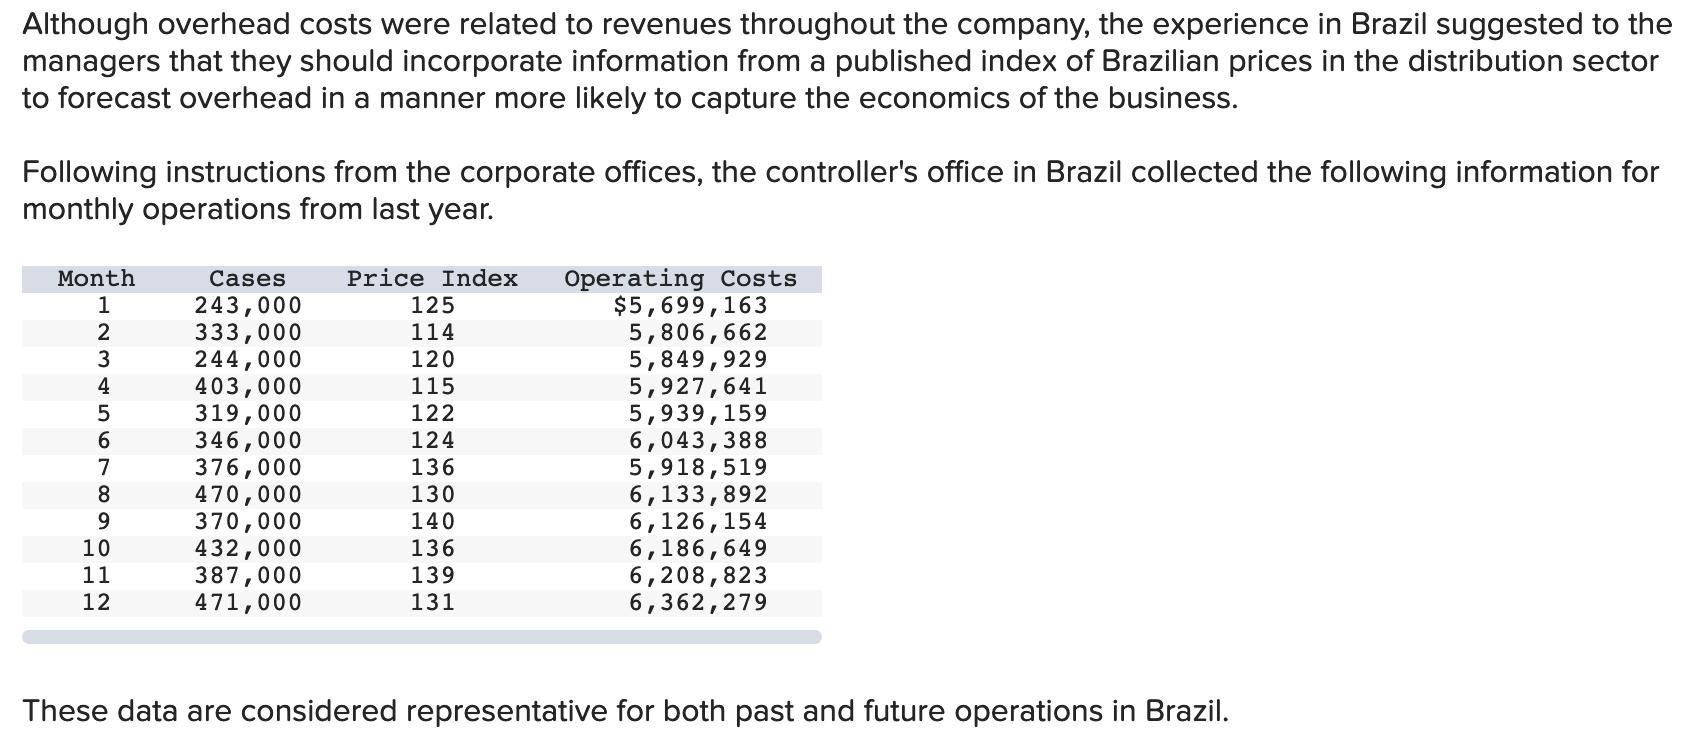 Although overhead costs were related to revenues throughout the company, the experience in Brazil suggested to the managers t